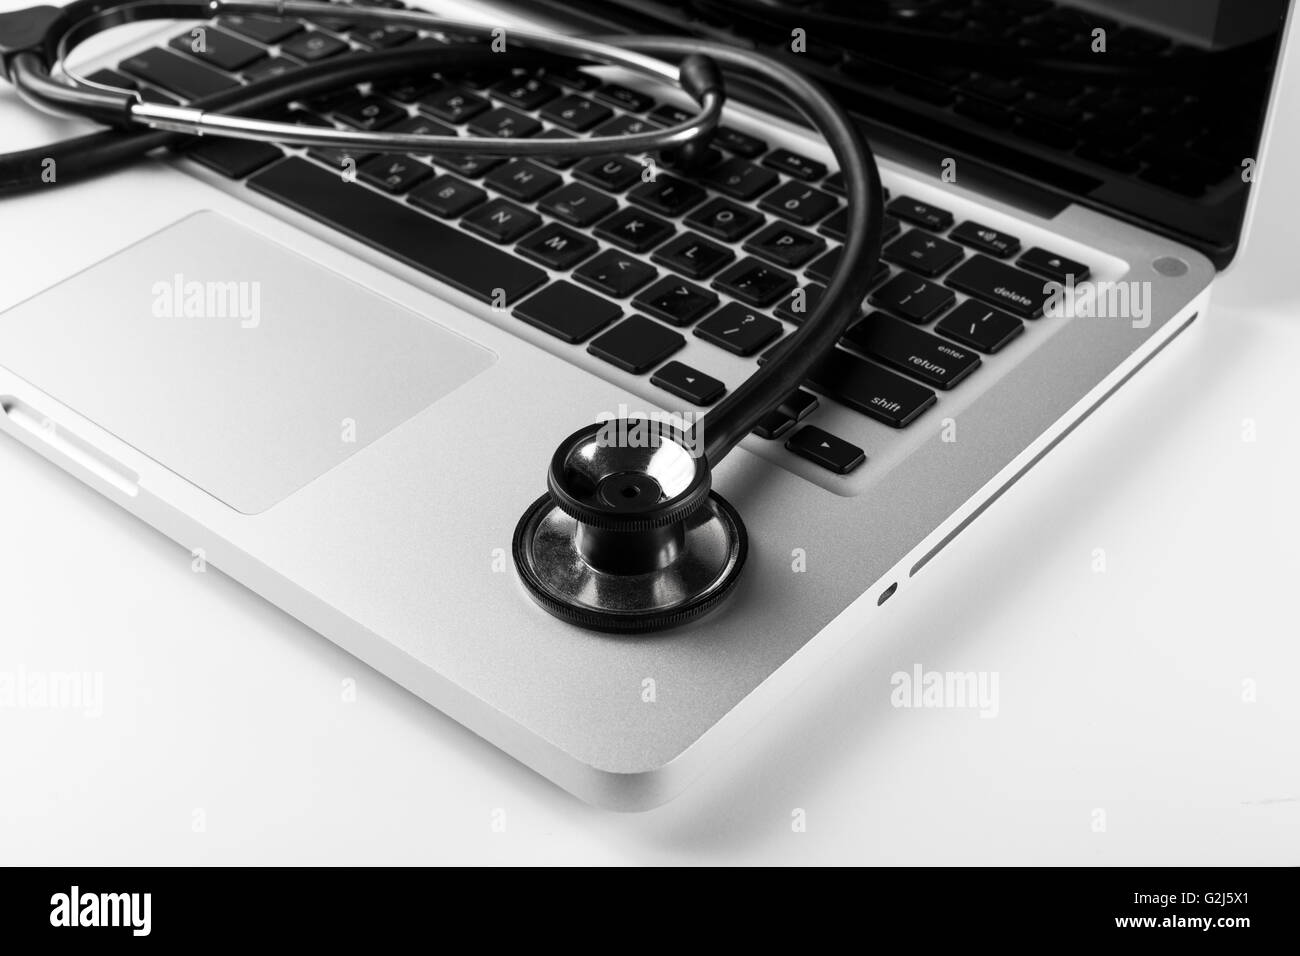 Silver laptop with black stethoscope on the keyboard side Stock Photo